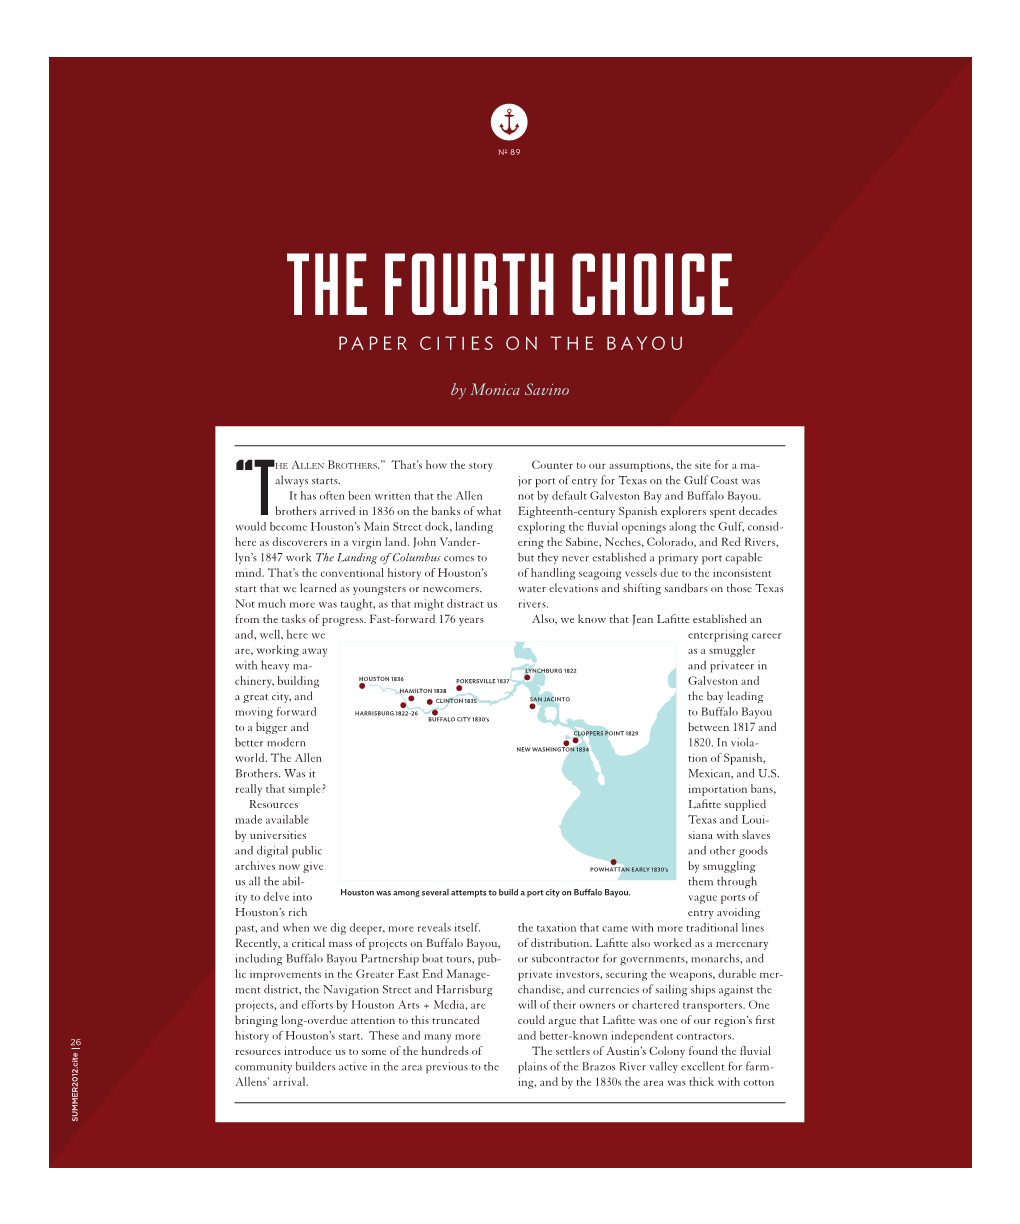 The Fourth Choice Paper Cities on the Bayou